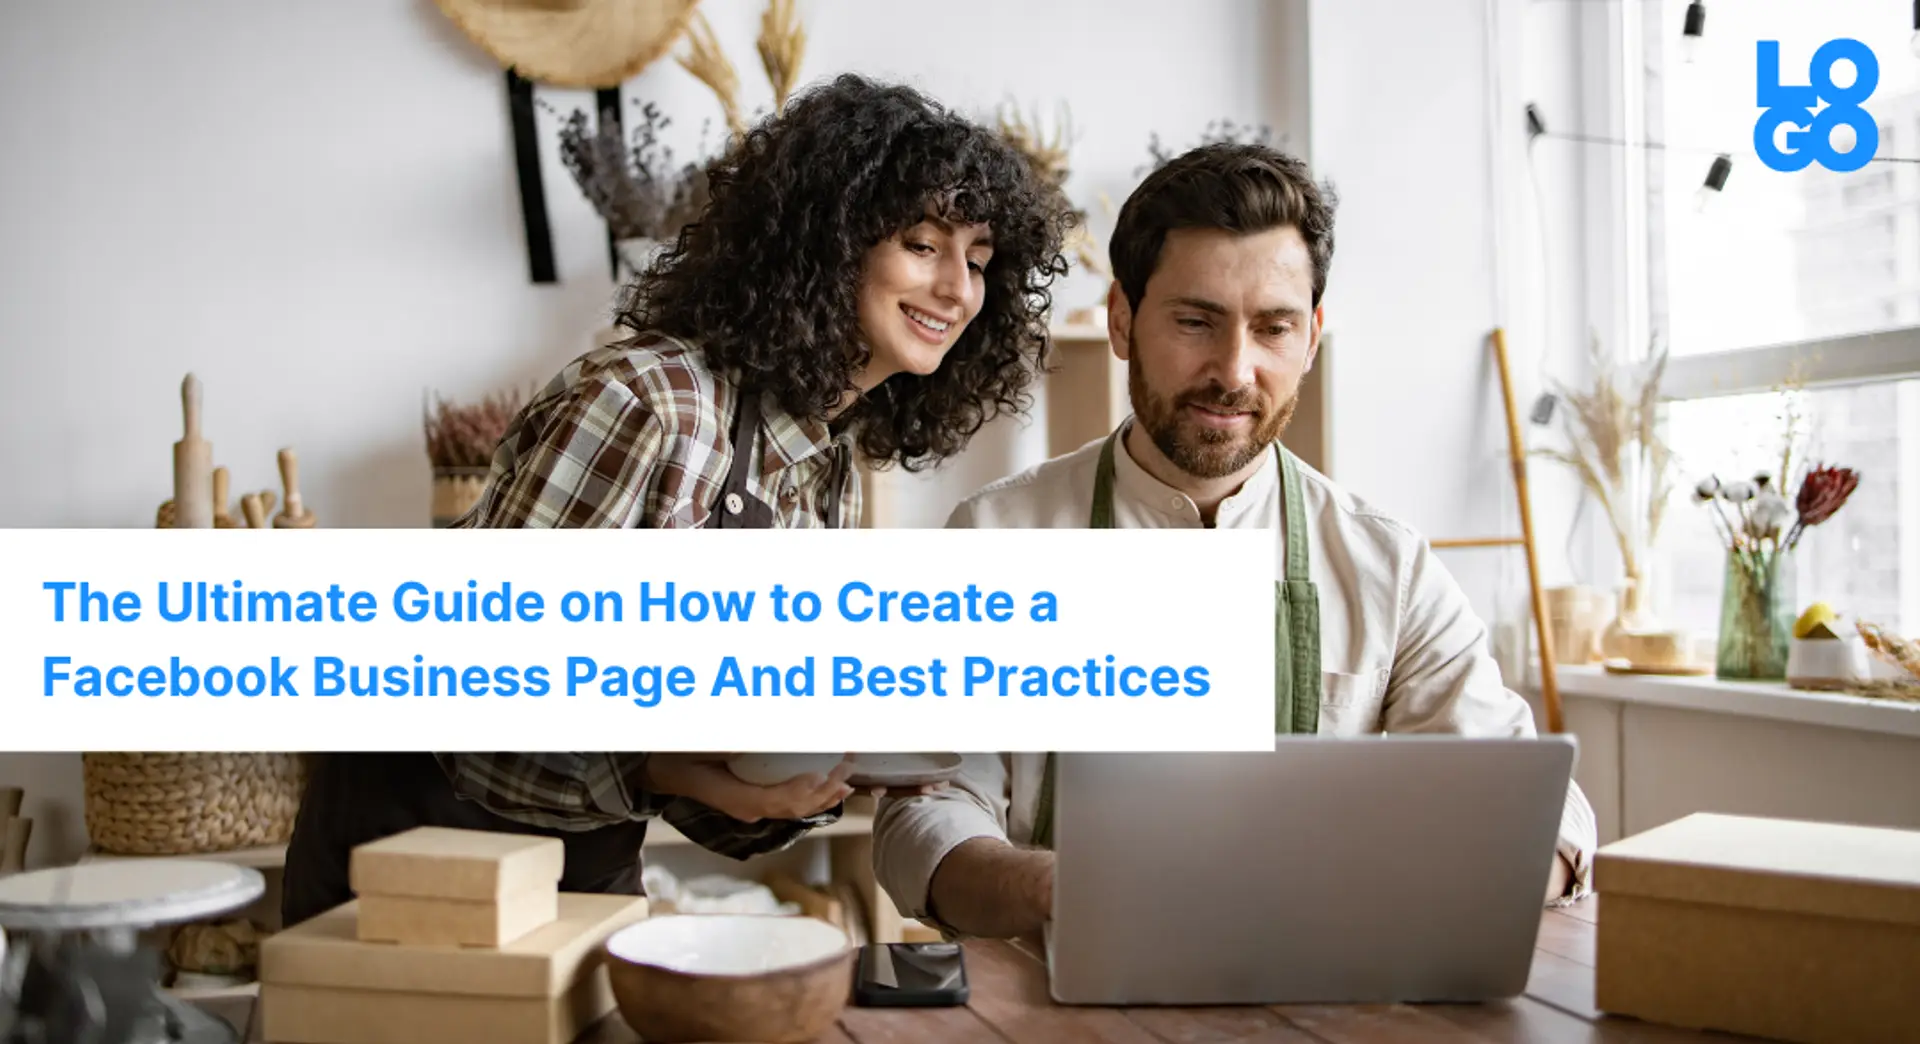 The Ultimate Guide on How to Create a Facebook Business Page And Best Practices